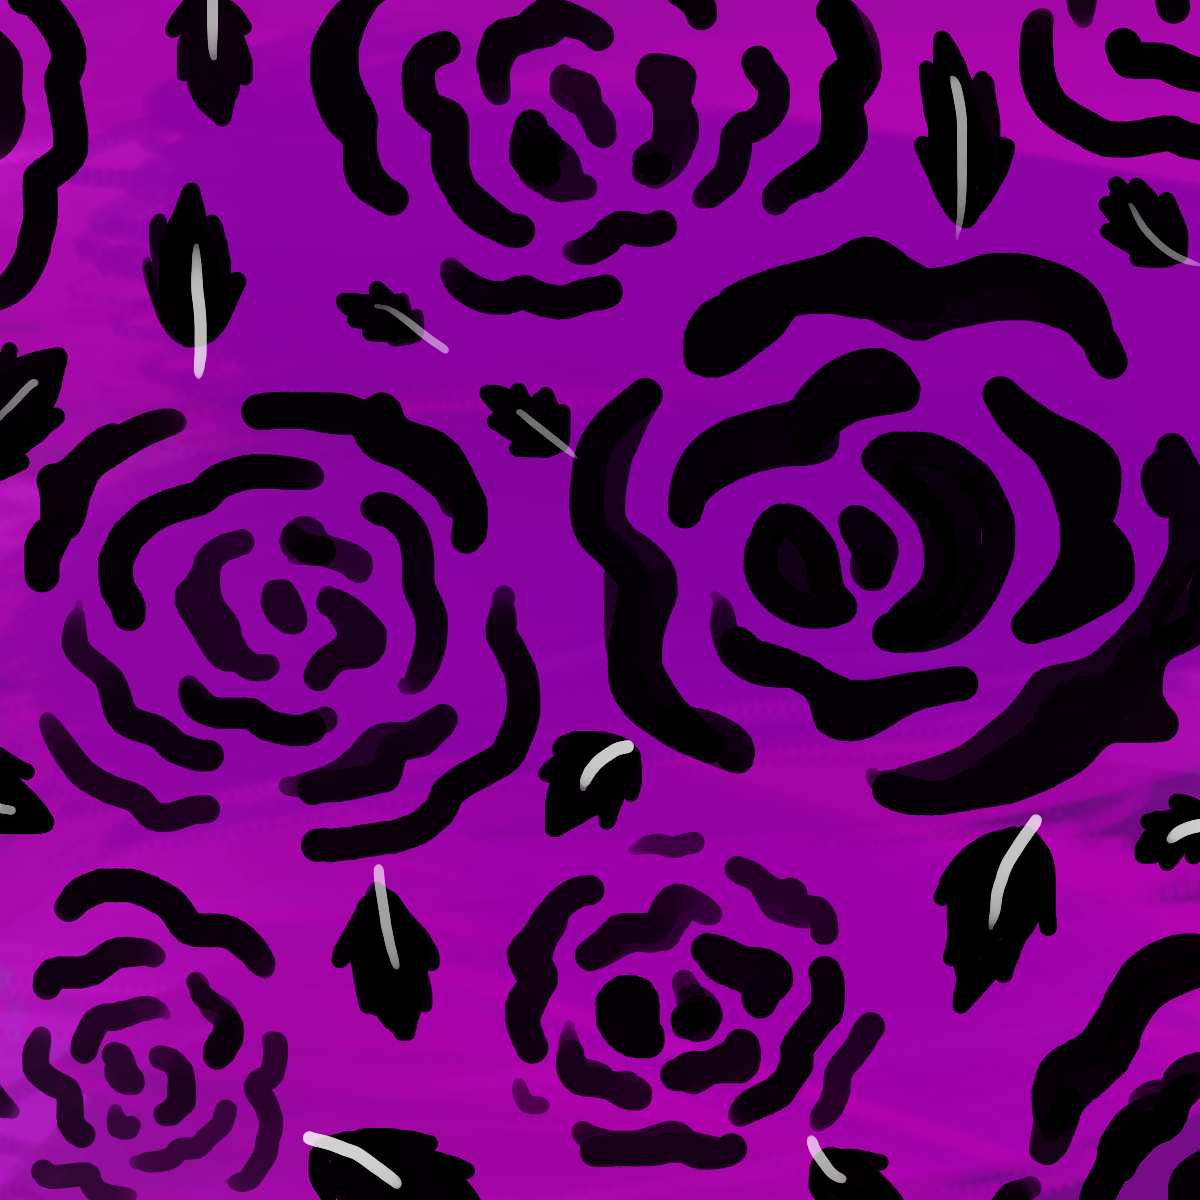 A drawn picture of artistic black roses with a purple background.